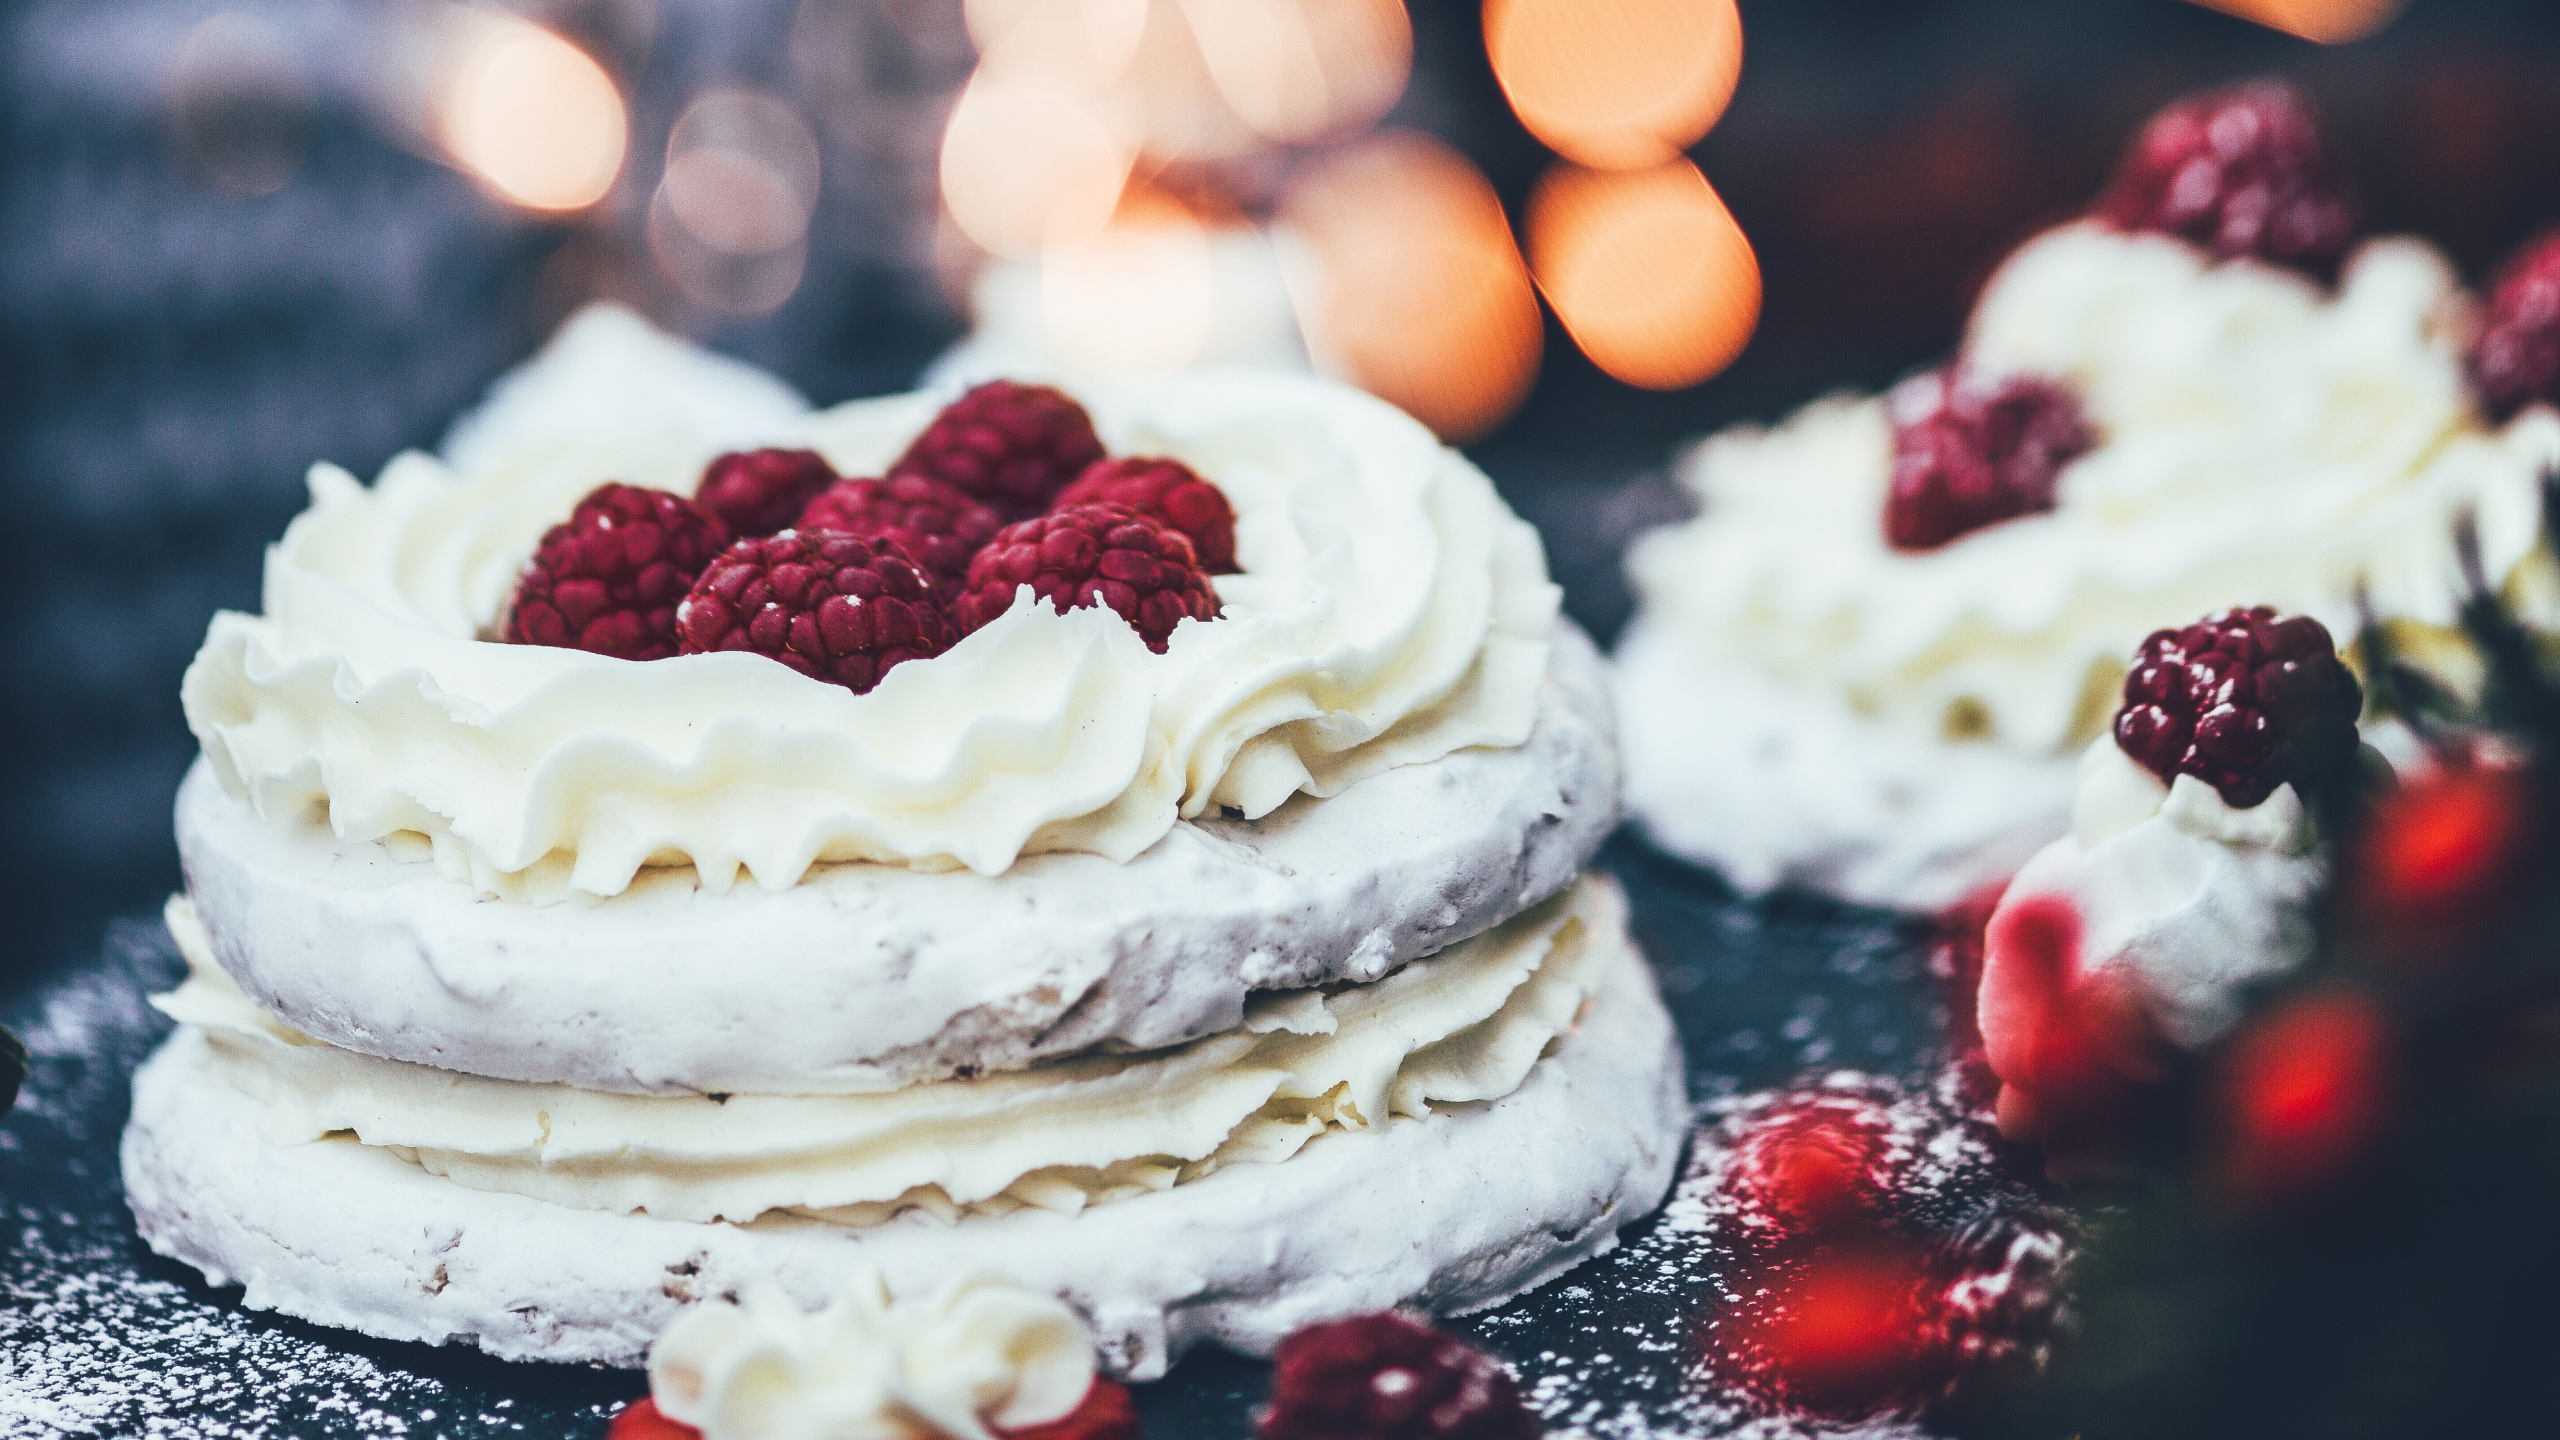 White and Red Cake With Red and White Sprinkles on Top. Wallpaper in 2560x1440 Resolution